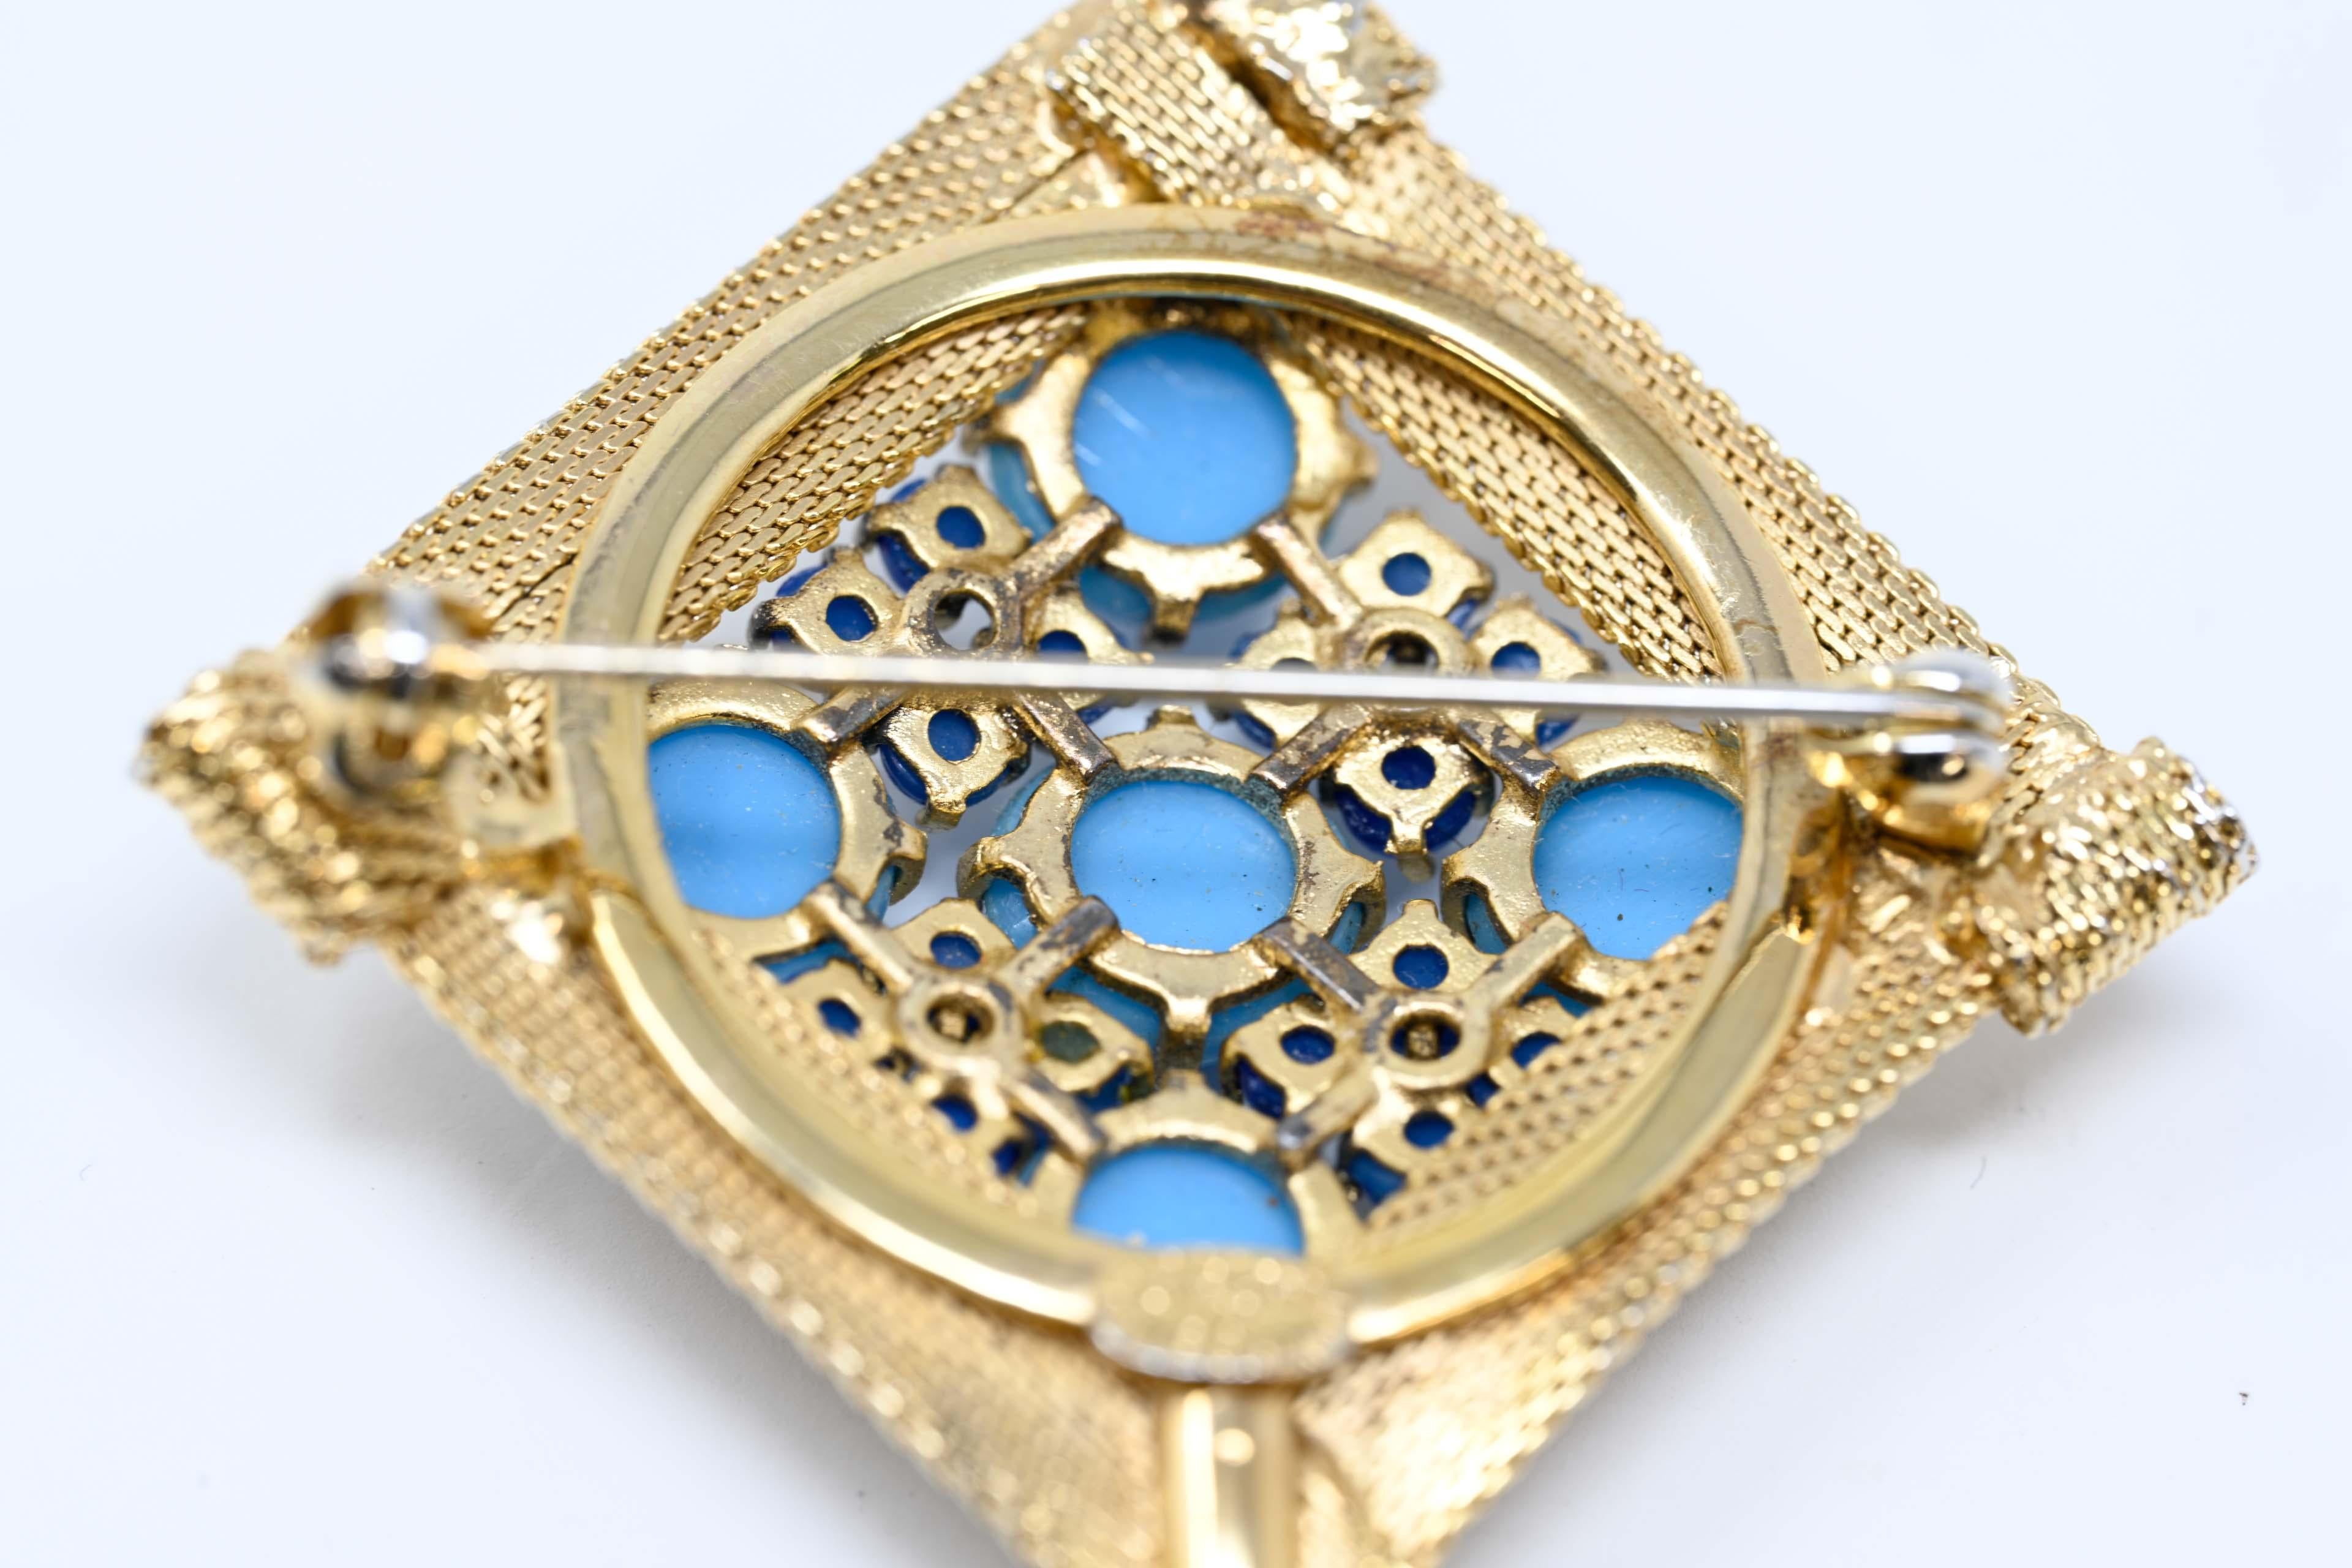 Christian Dior 1962 Blue Cabochon Brooch In Good Condition For Sale In Montreal, QC